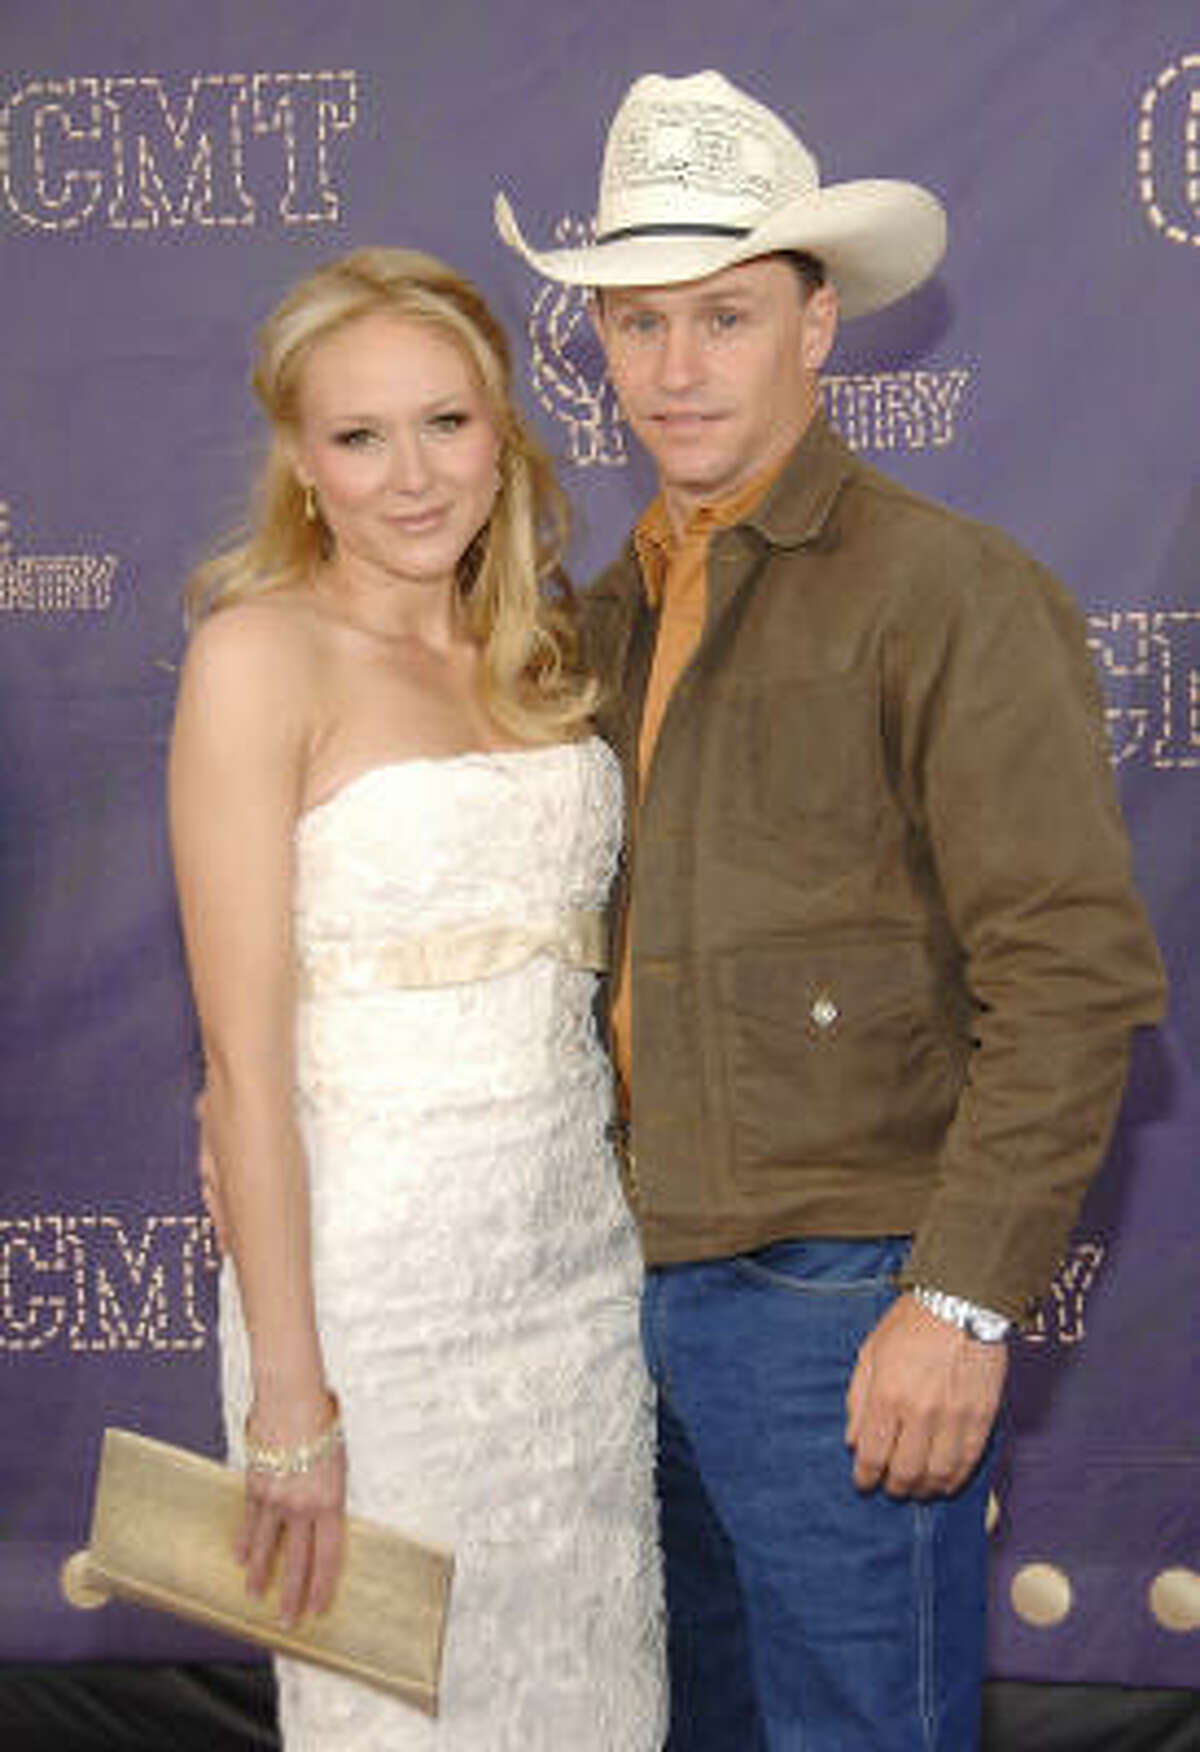 Singer Jewel married her boyfriend, rodeo champ Ty Murray, in 2008 after 10 years together. Jewel said marriage needed to be taken seriously and there was no rush. Not to mention all of the friends they had that were married and divorced already.